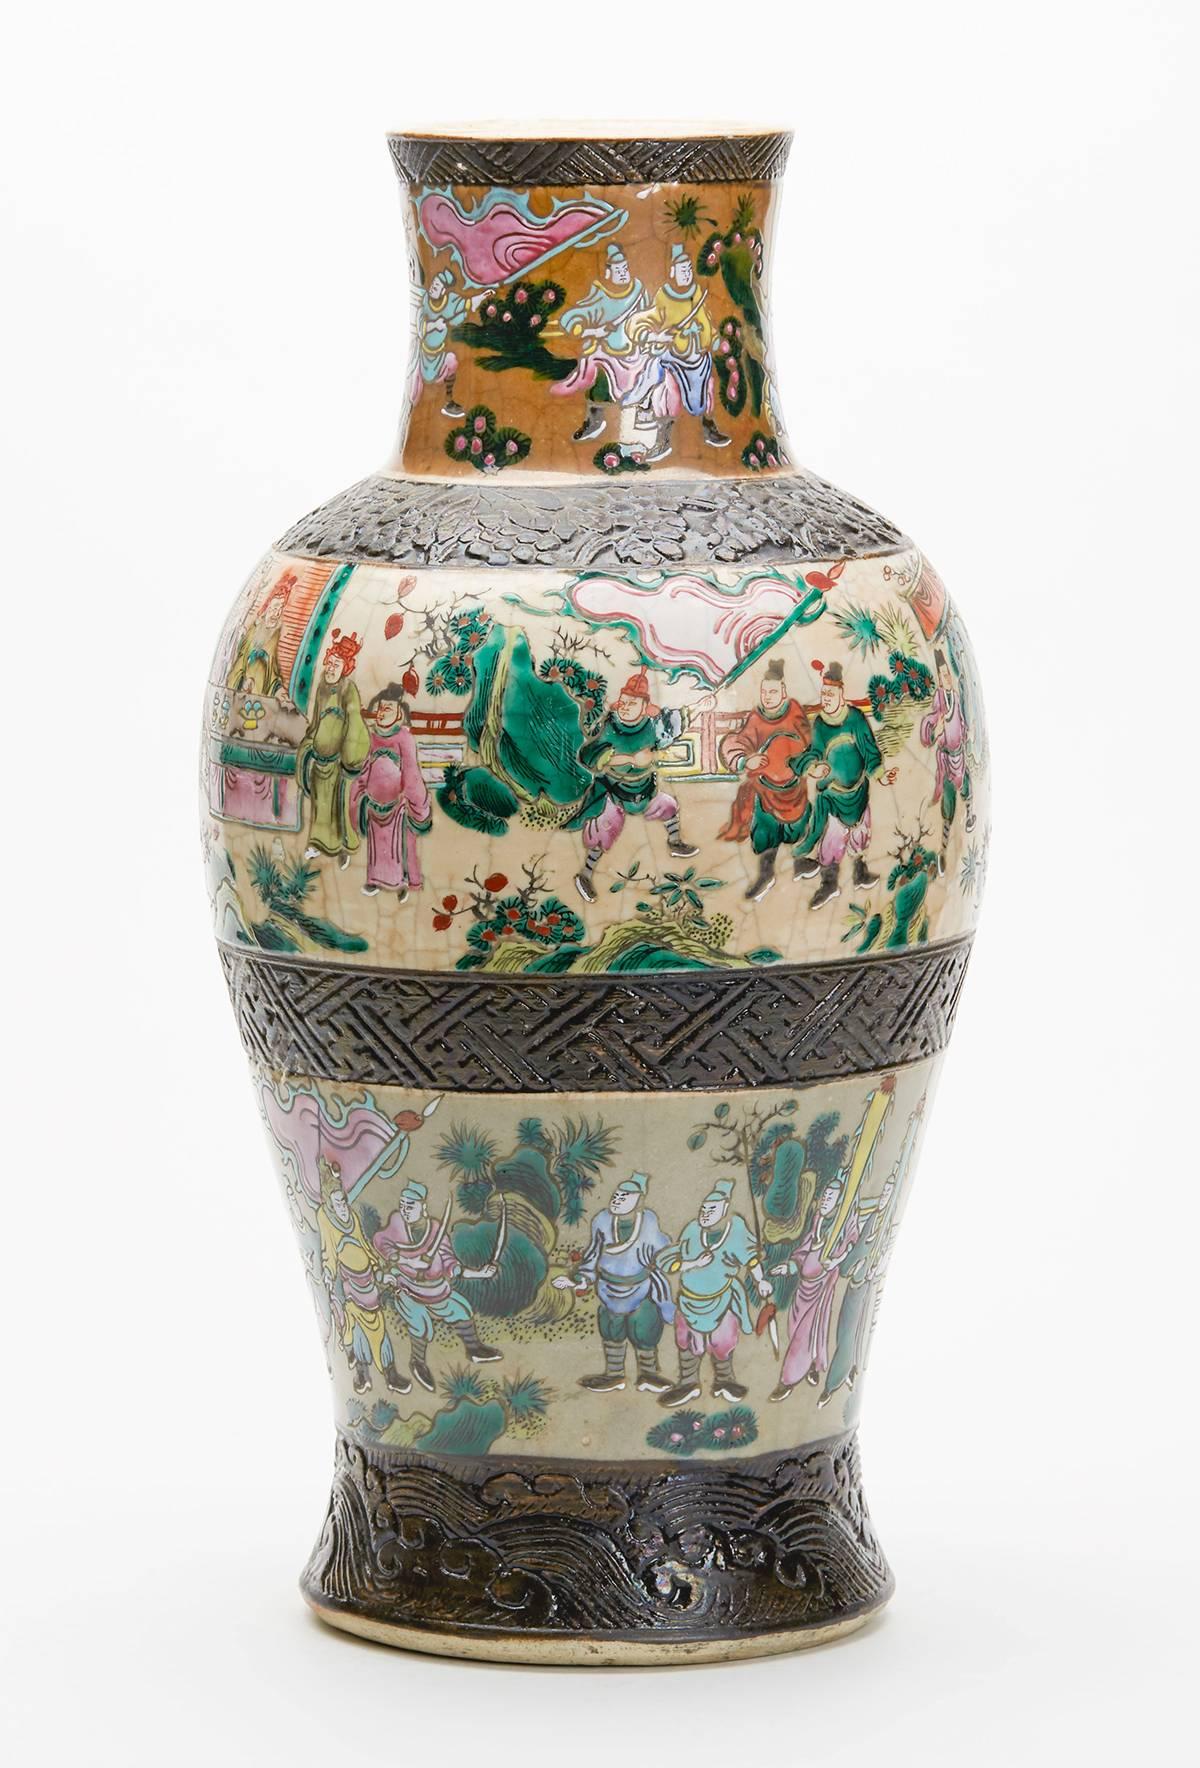 A stunning and large antique Chinese vase hand painted in the Famille rose palette over a craquelure ground with moulded bands separating the painted scenes into three continuous scenes. The painting is exceptional with a battle scene around the